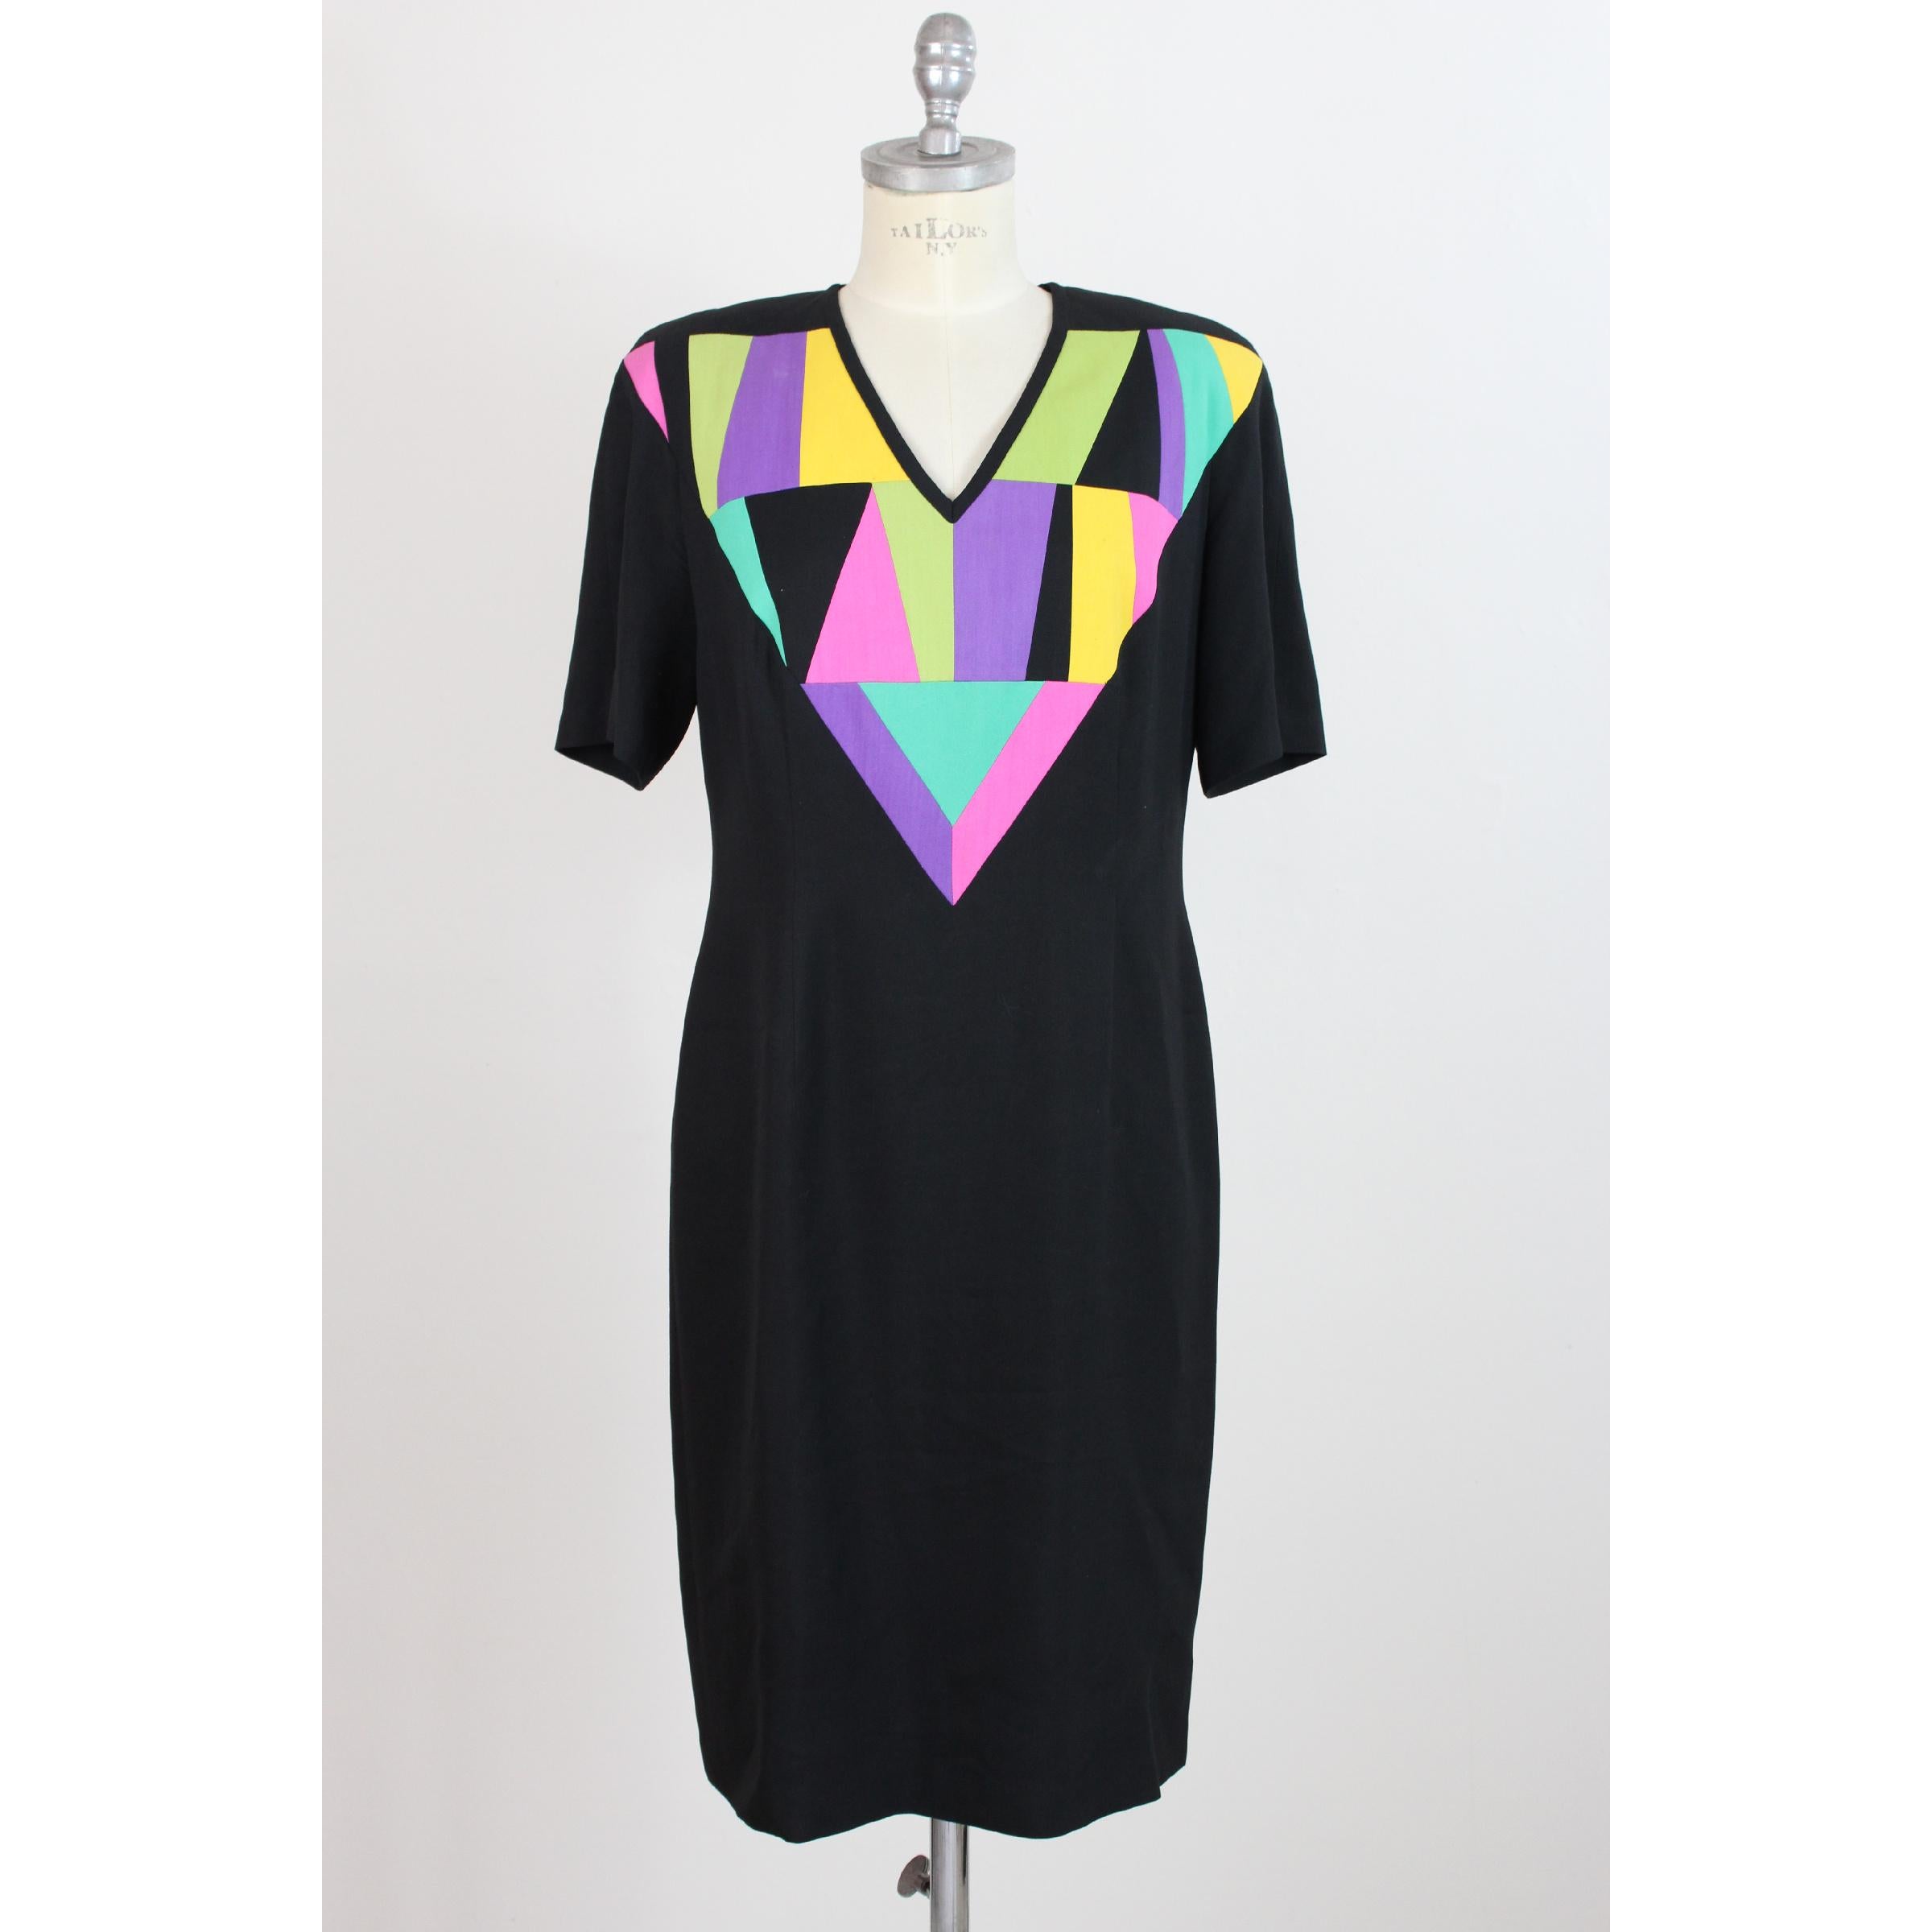 Louis Feraud vintage evening dress, black, with geometric designs on the chest, V-shaped, 55% viscose 45% silk. Short sleeve. Excellent vintage conditions. Made in Germany.

Size: 44 It 10 Us 12 Uk

Shoulders: 46 cm
Bust / Chest: 50 cm
Sleeve: 24